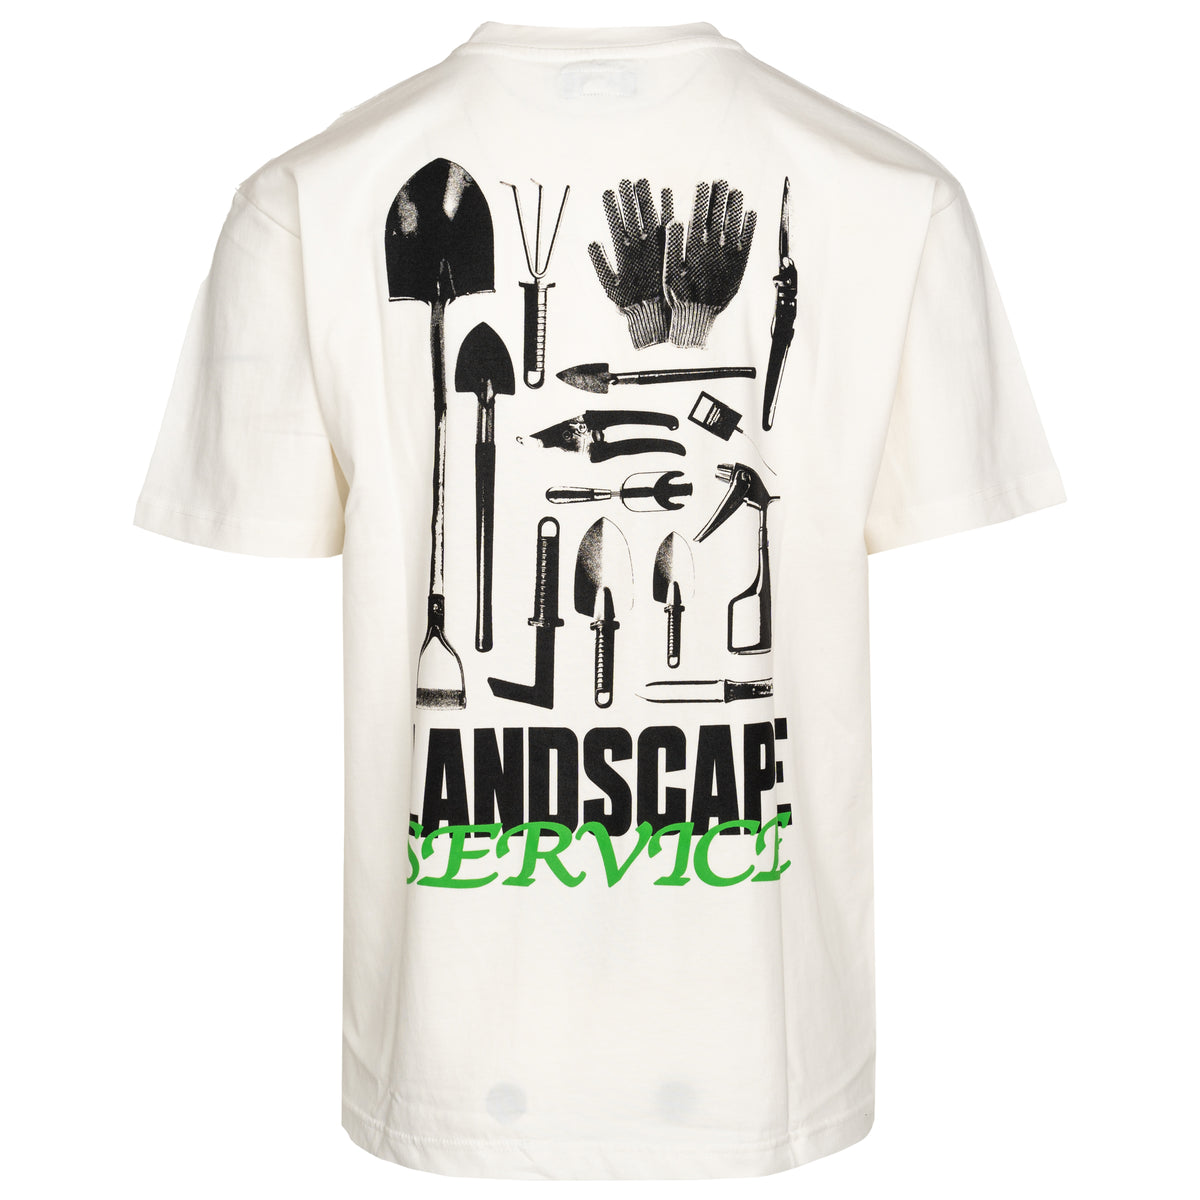 Load image into Gallery viewer, Market White Landscape Service Pocket Tee
